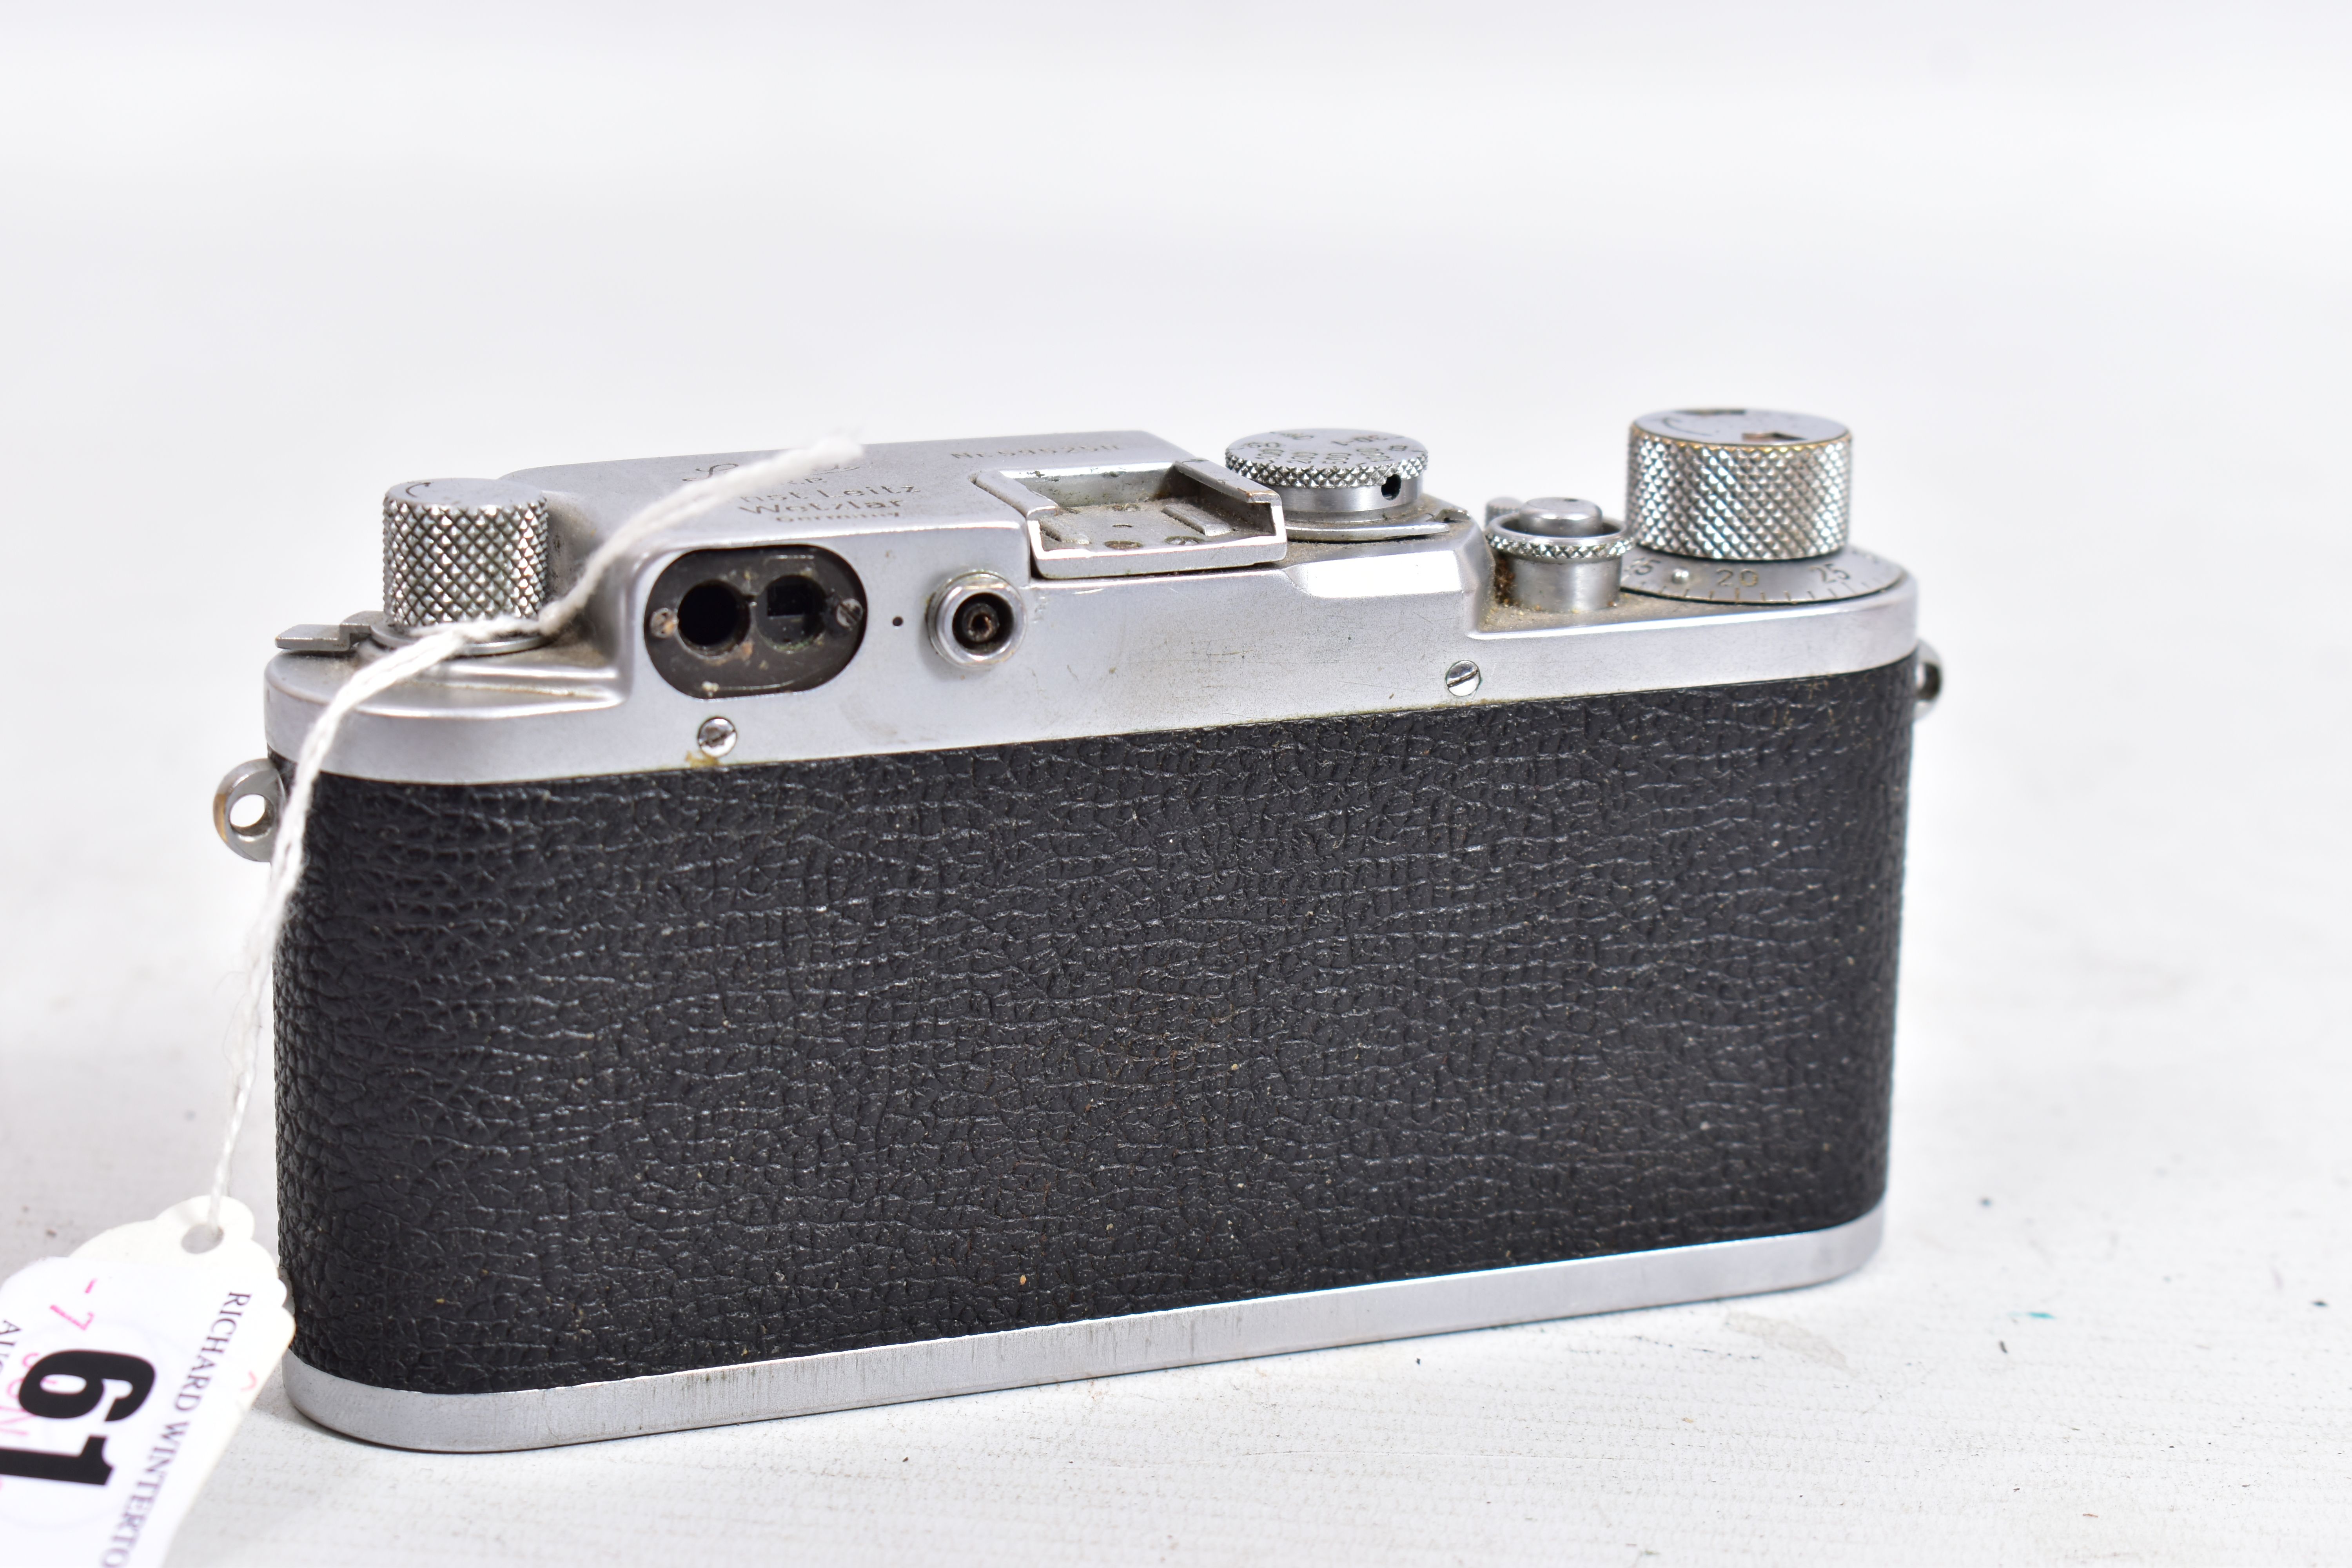 A 1951-2 LEICA lllf RANGEFINDER CAMERA Ser.No. 595250 fitted with a Summitar 5cm f2 lens Ser.No - Image 2 of 5